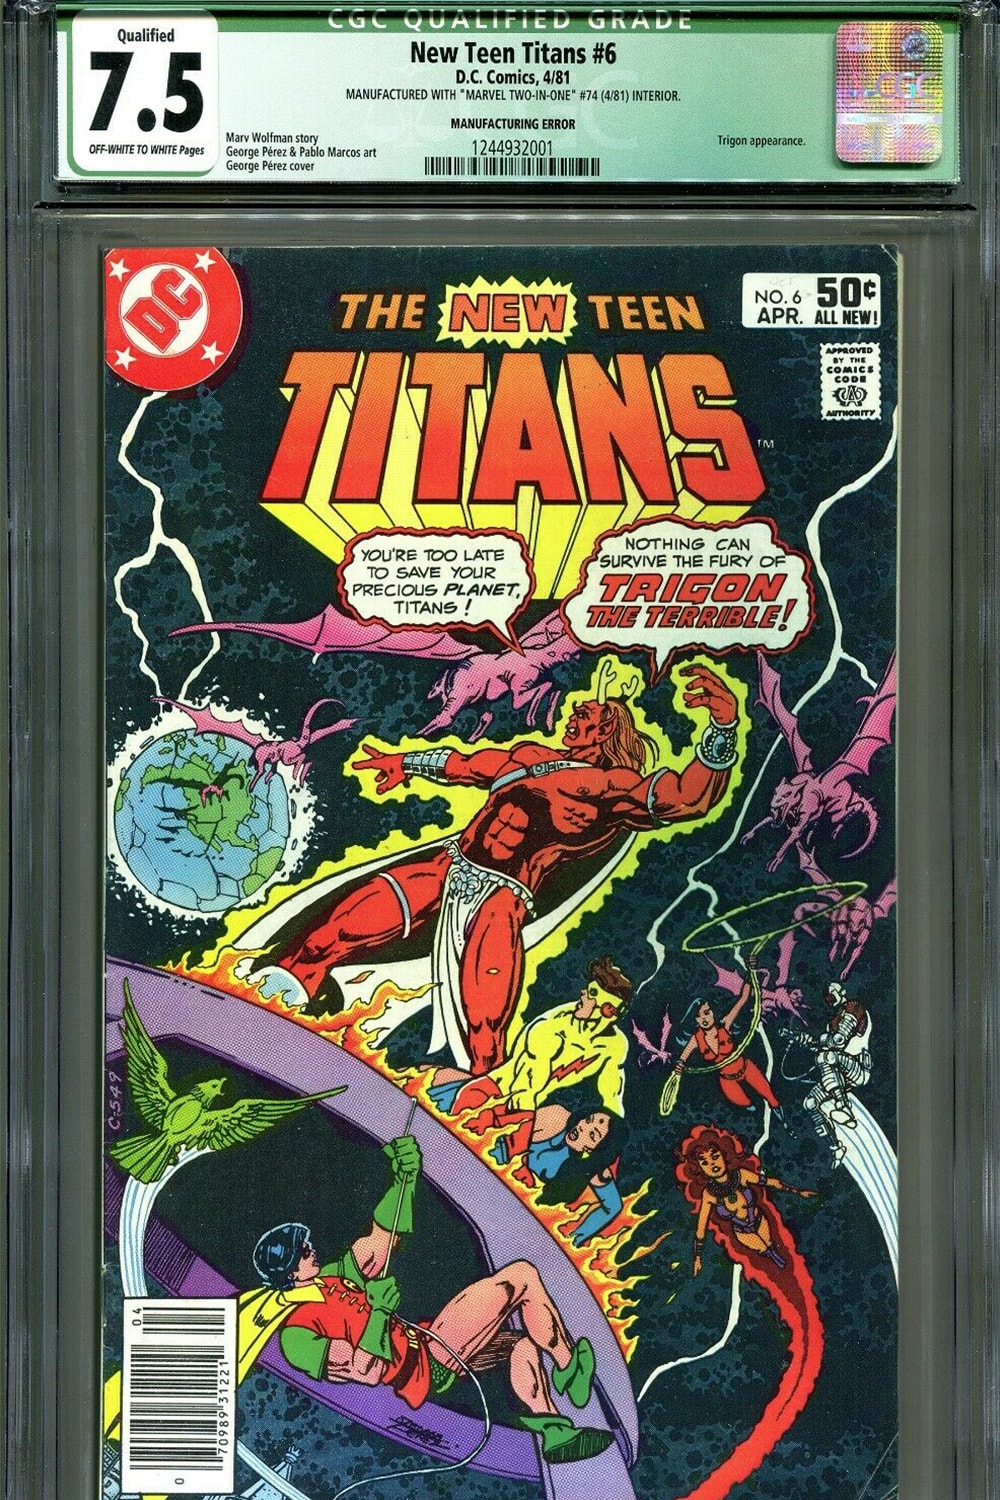 Marvel Comic with DC Cover Hits eBay for Over $1 million USD Ronald's Printing Marvel-Two-In-One #74 auction 1,200,000 7.5 condition new teen titans #6 